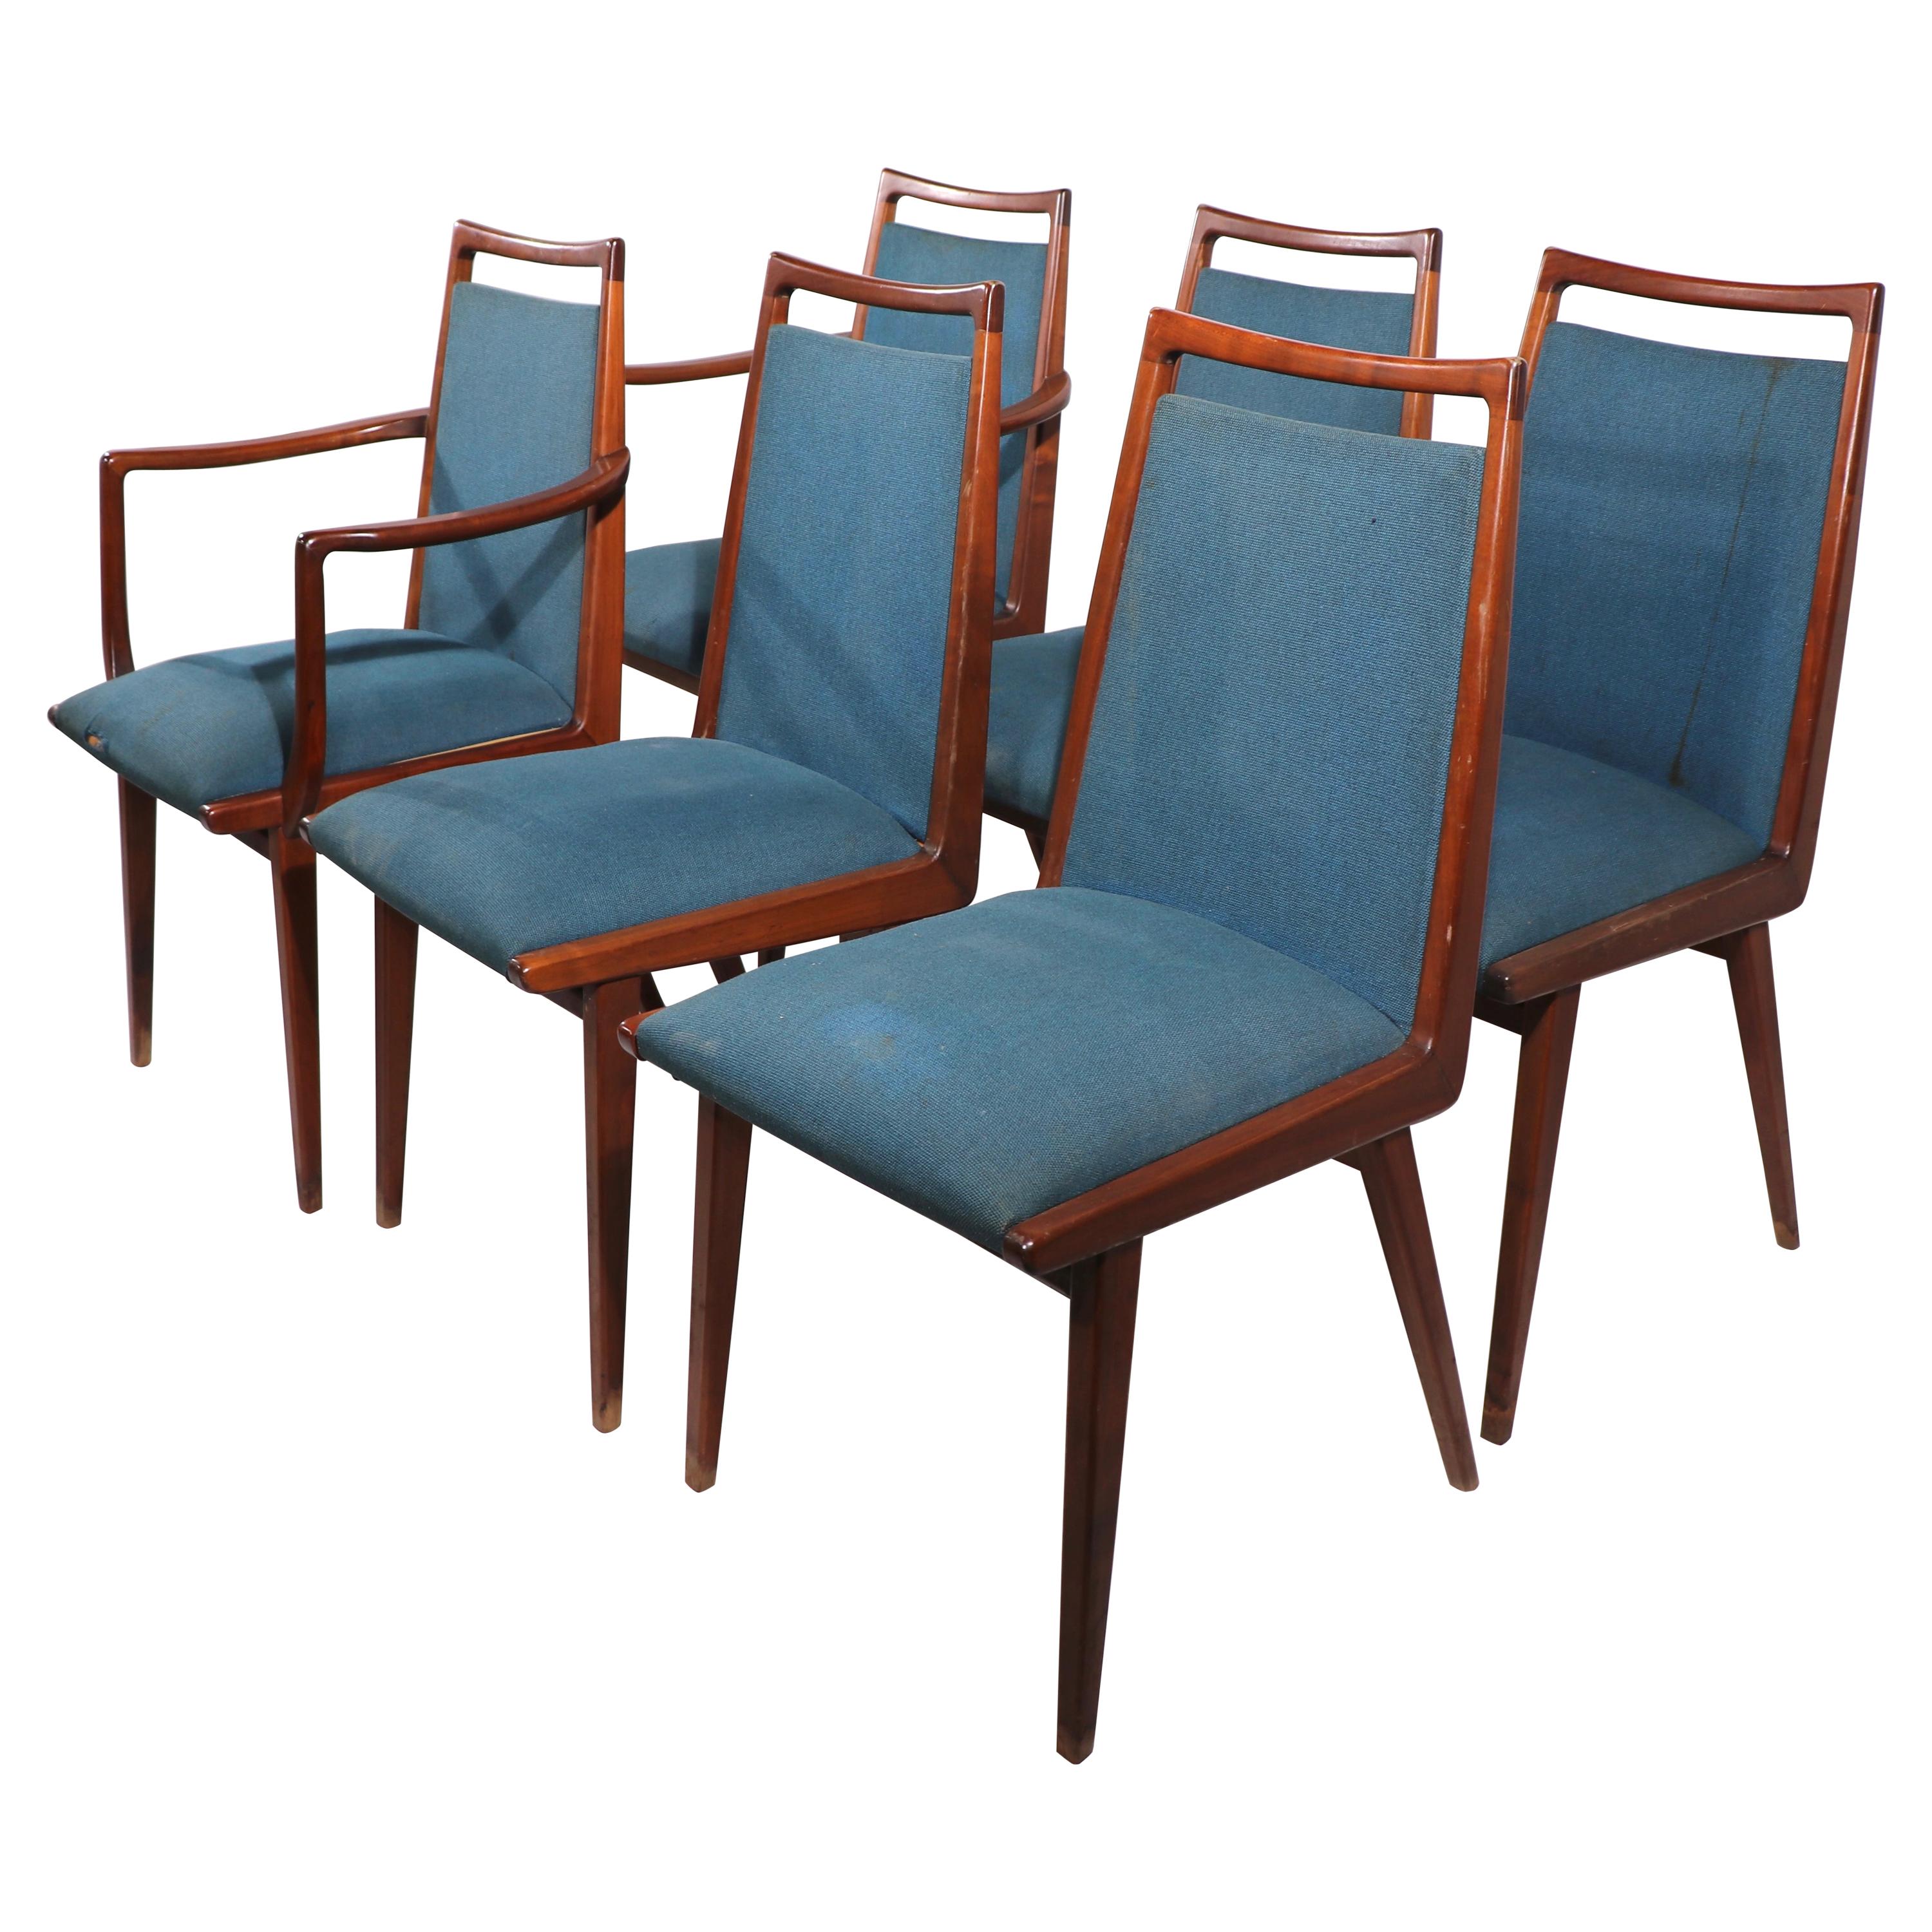 Set of 6 Mid Century Dining Chairs Made in Germany by Casala